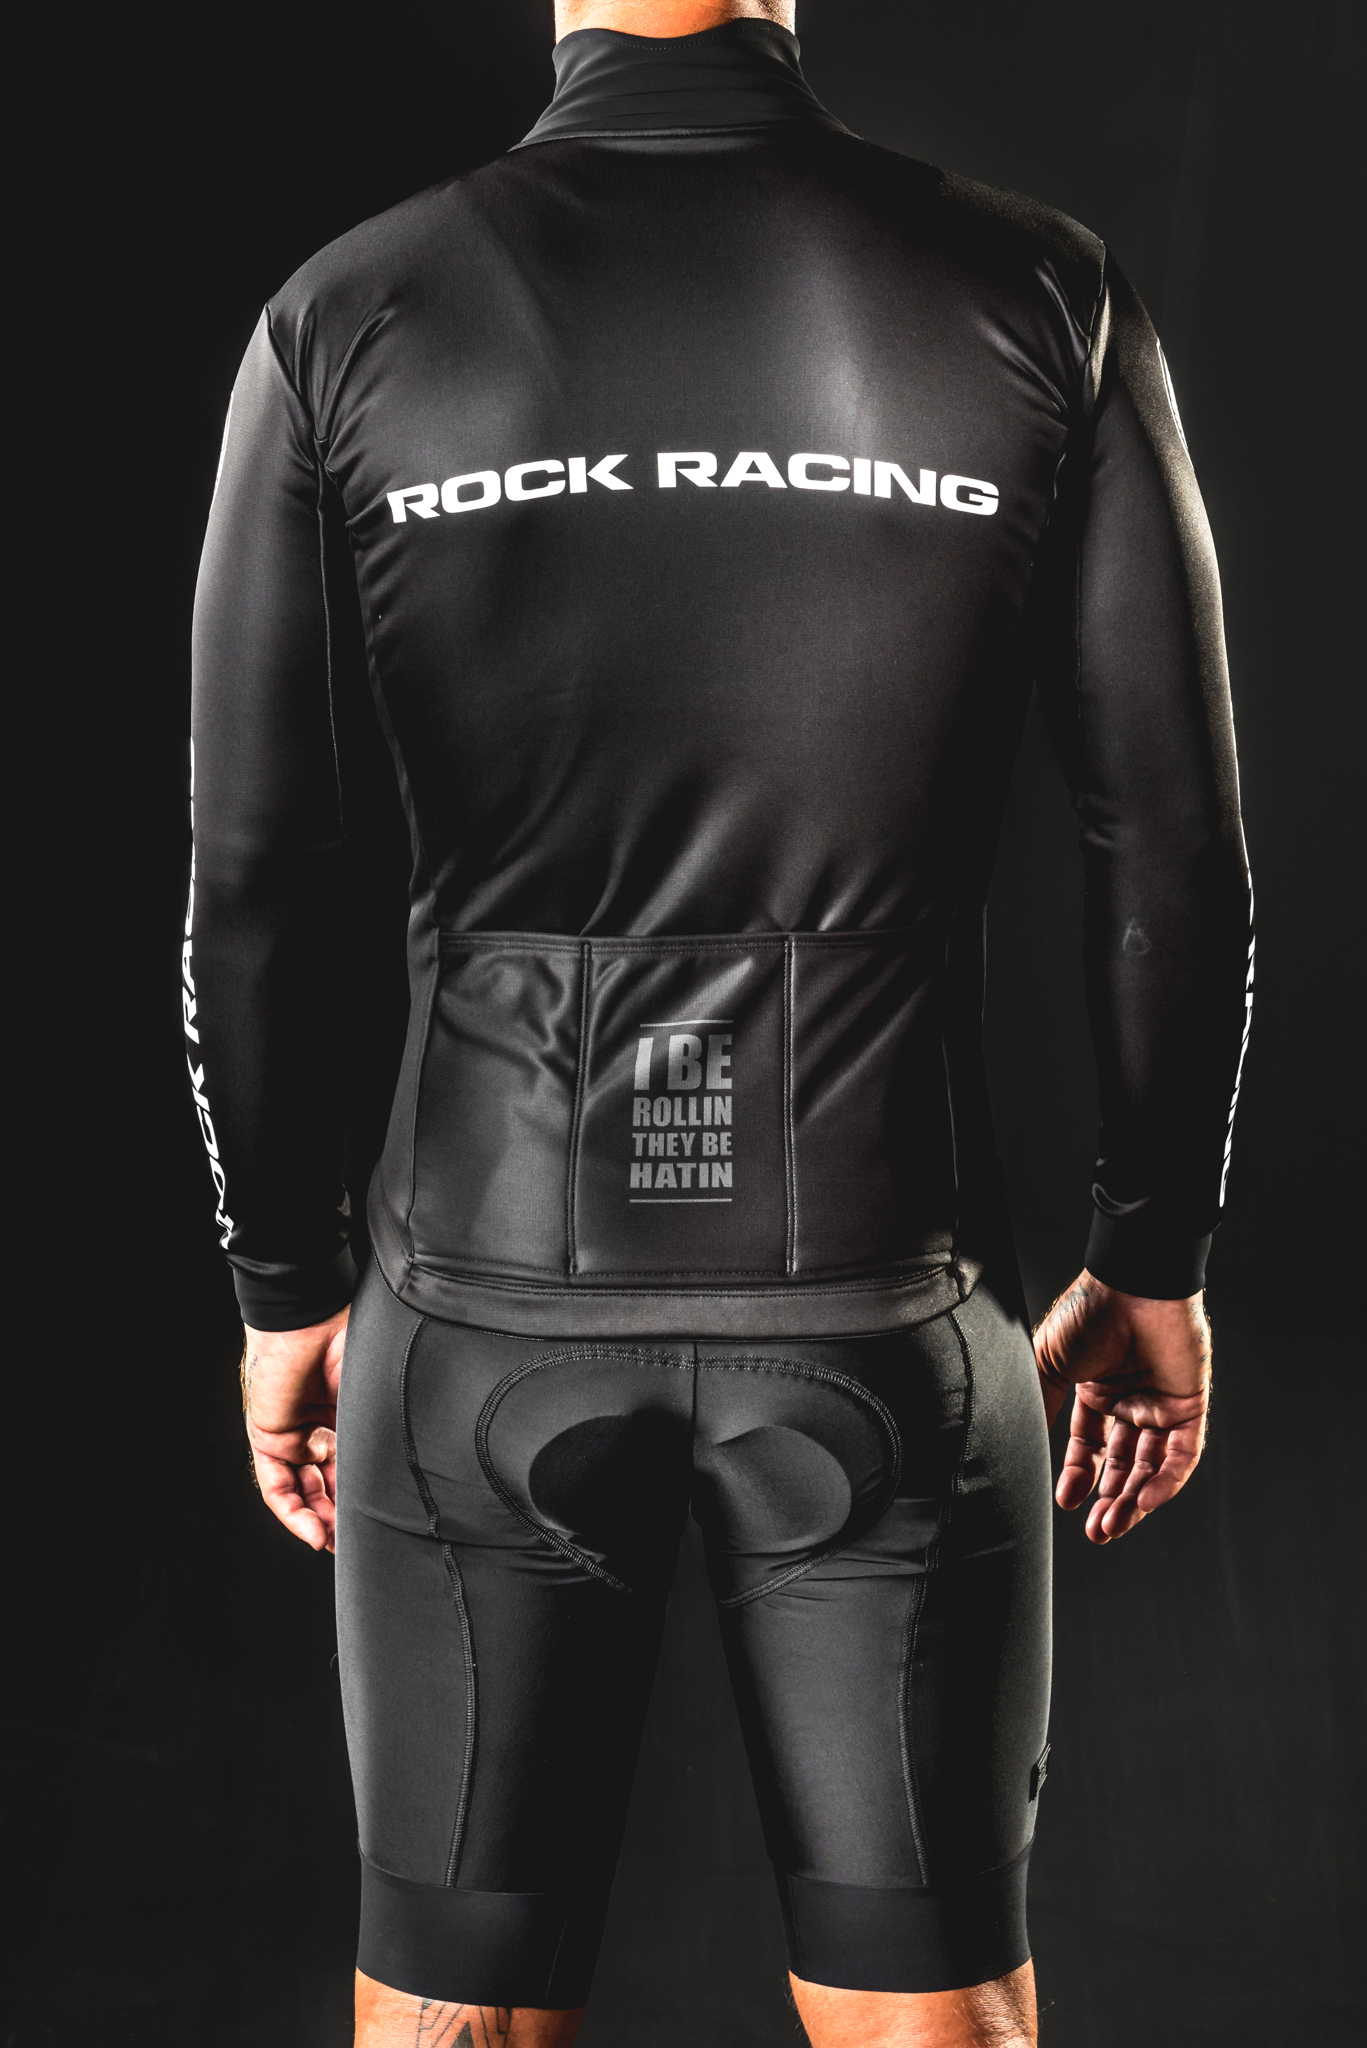 RRG PRO WINTER JACKET – ROCK RACING (Official Web Store)